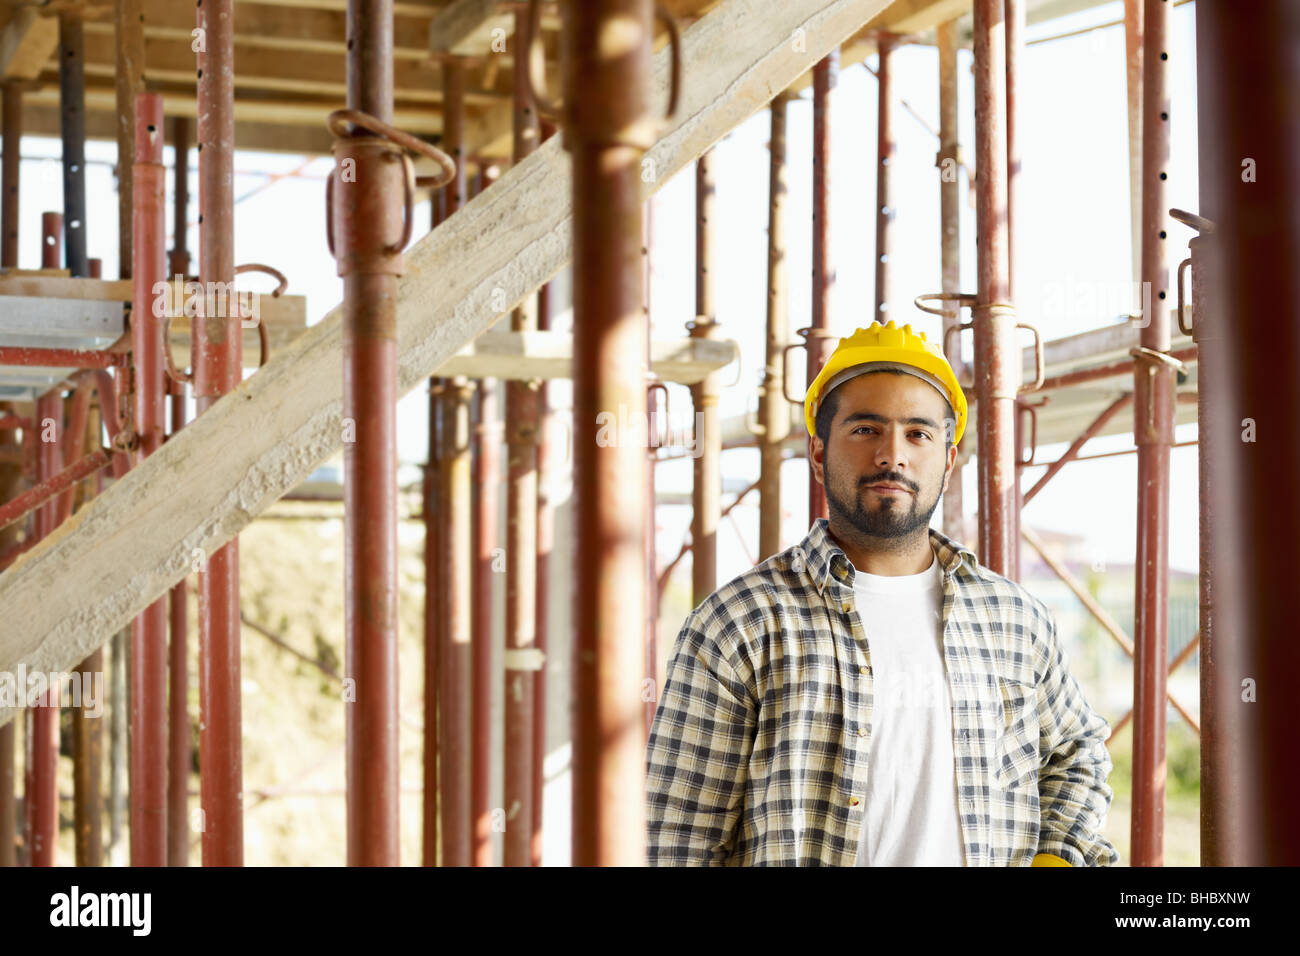 Portrait of latin american construction worker looking at camera Stock Photo